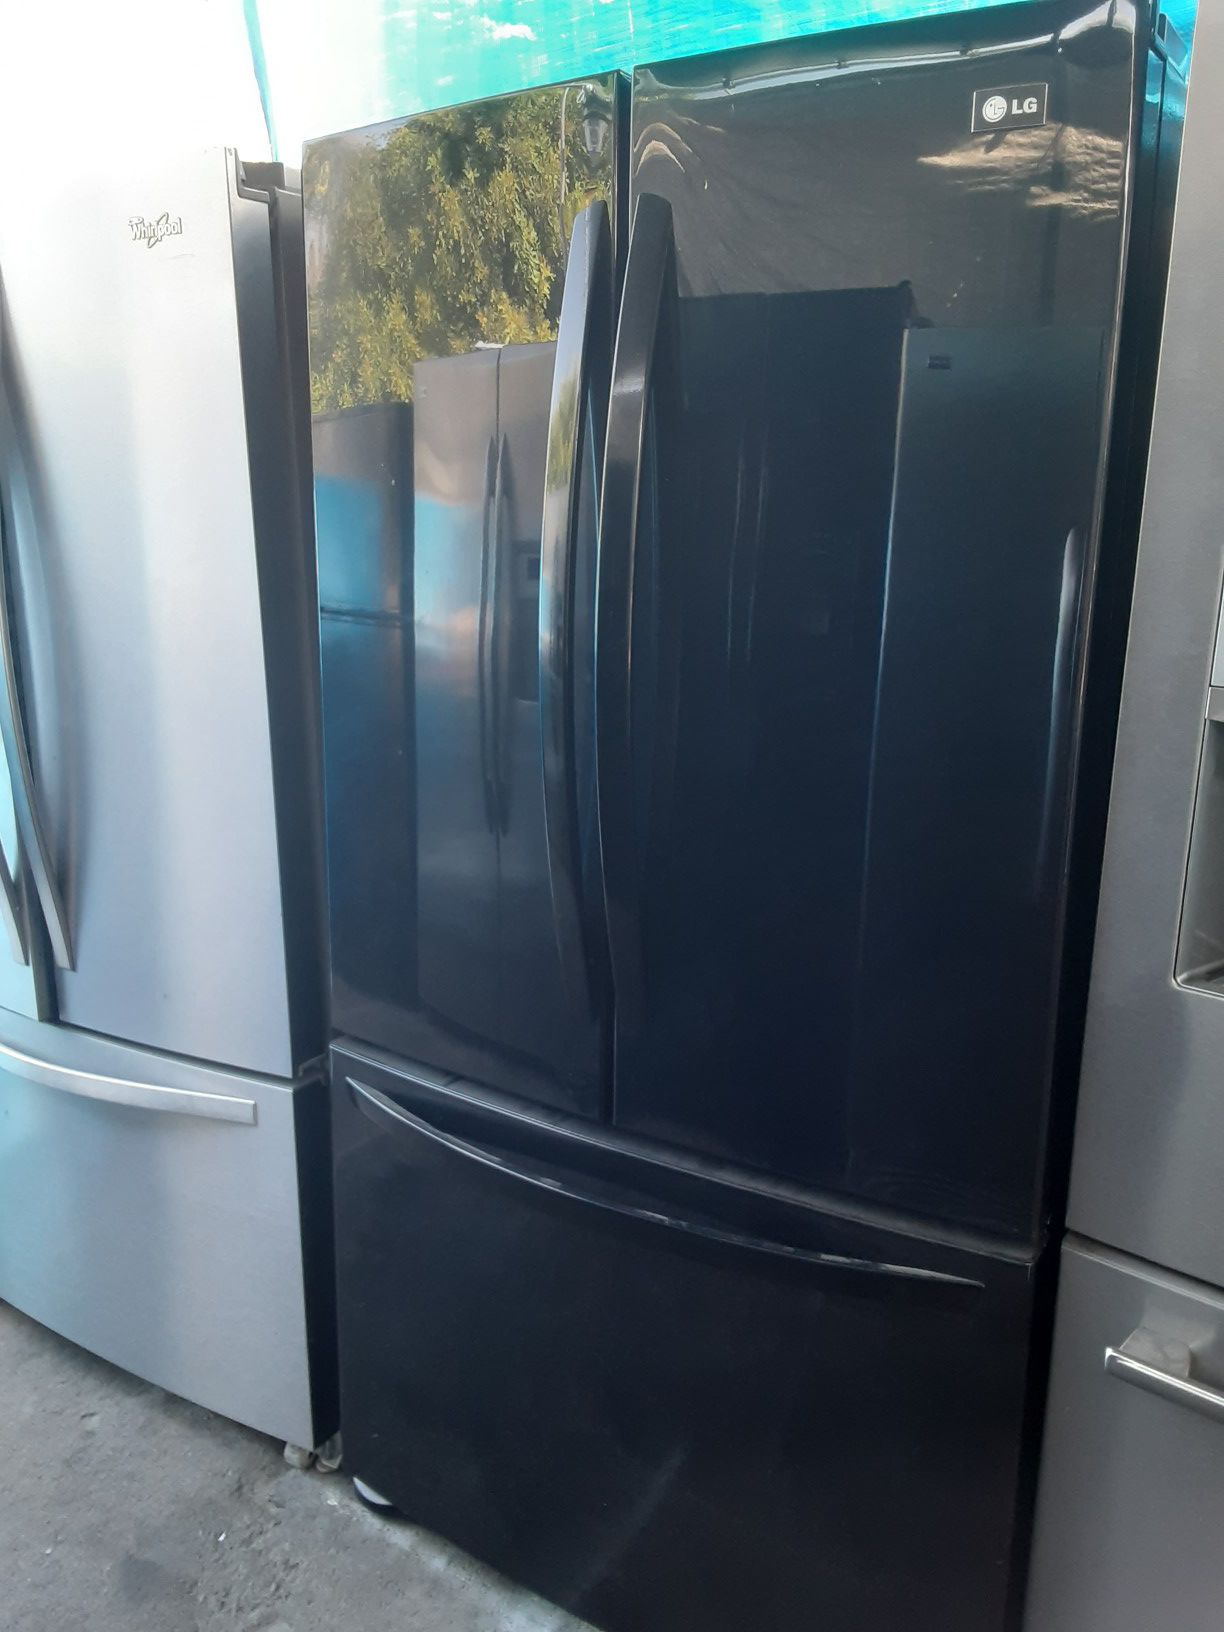 $599 LG black gloss finish French door bottom freezer fridge includes delivery in the San Fernando Valley a warranty and installation